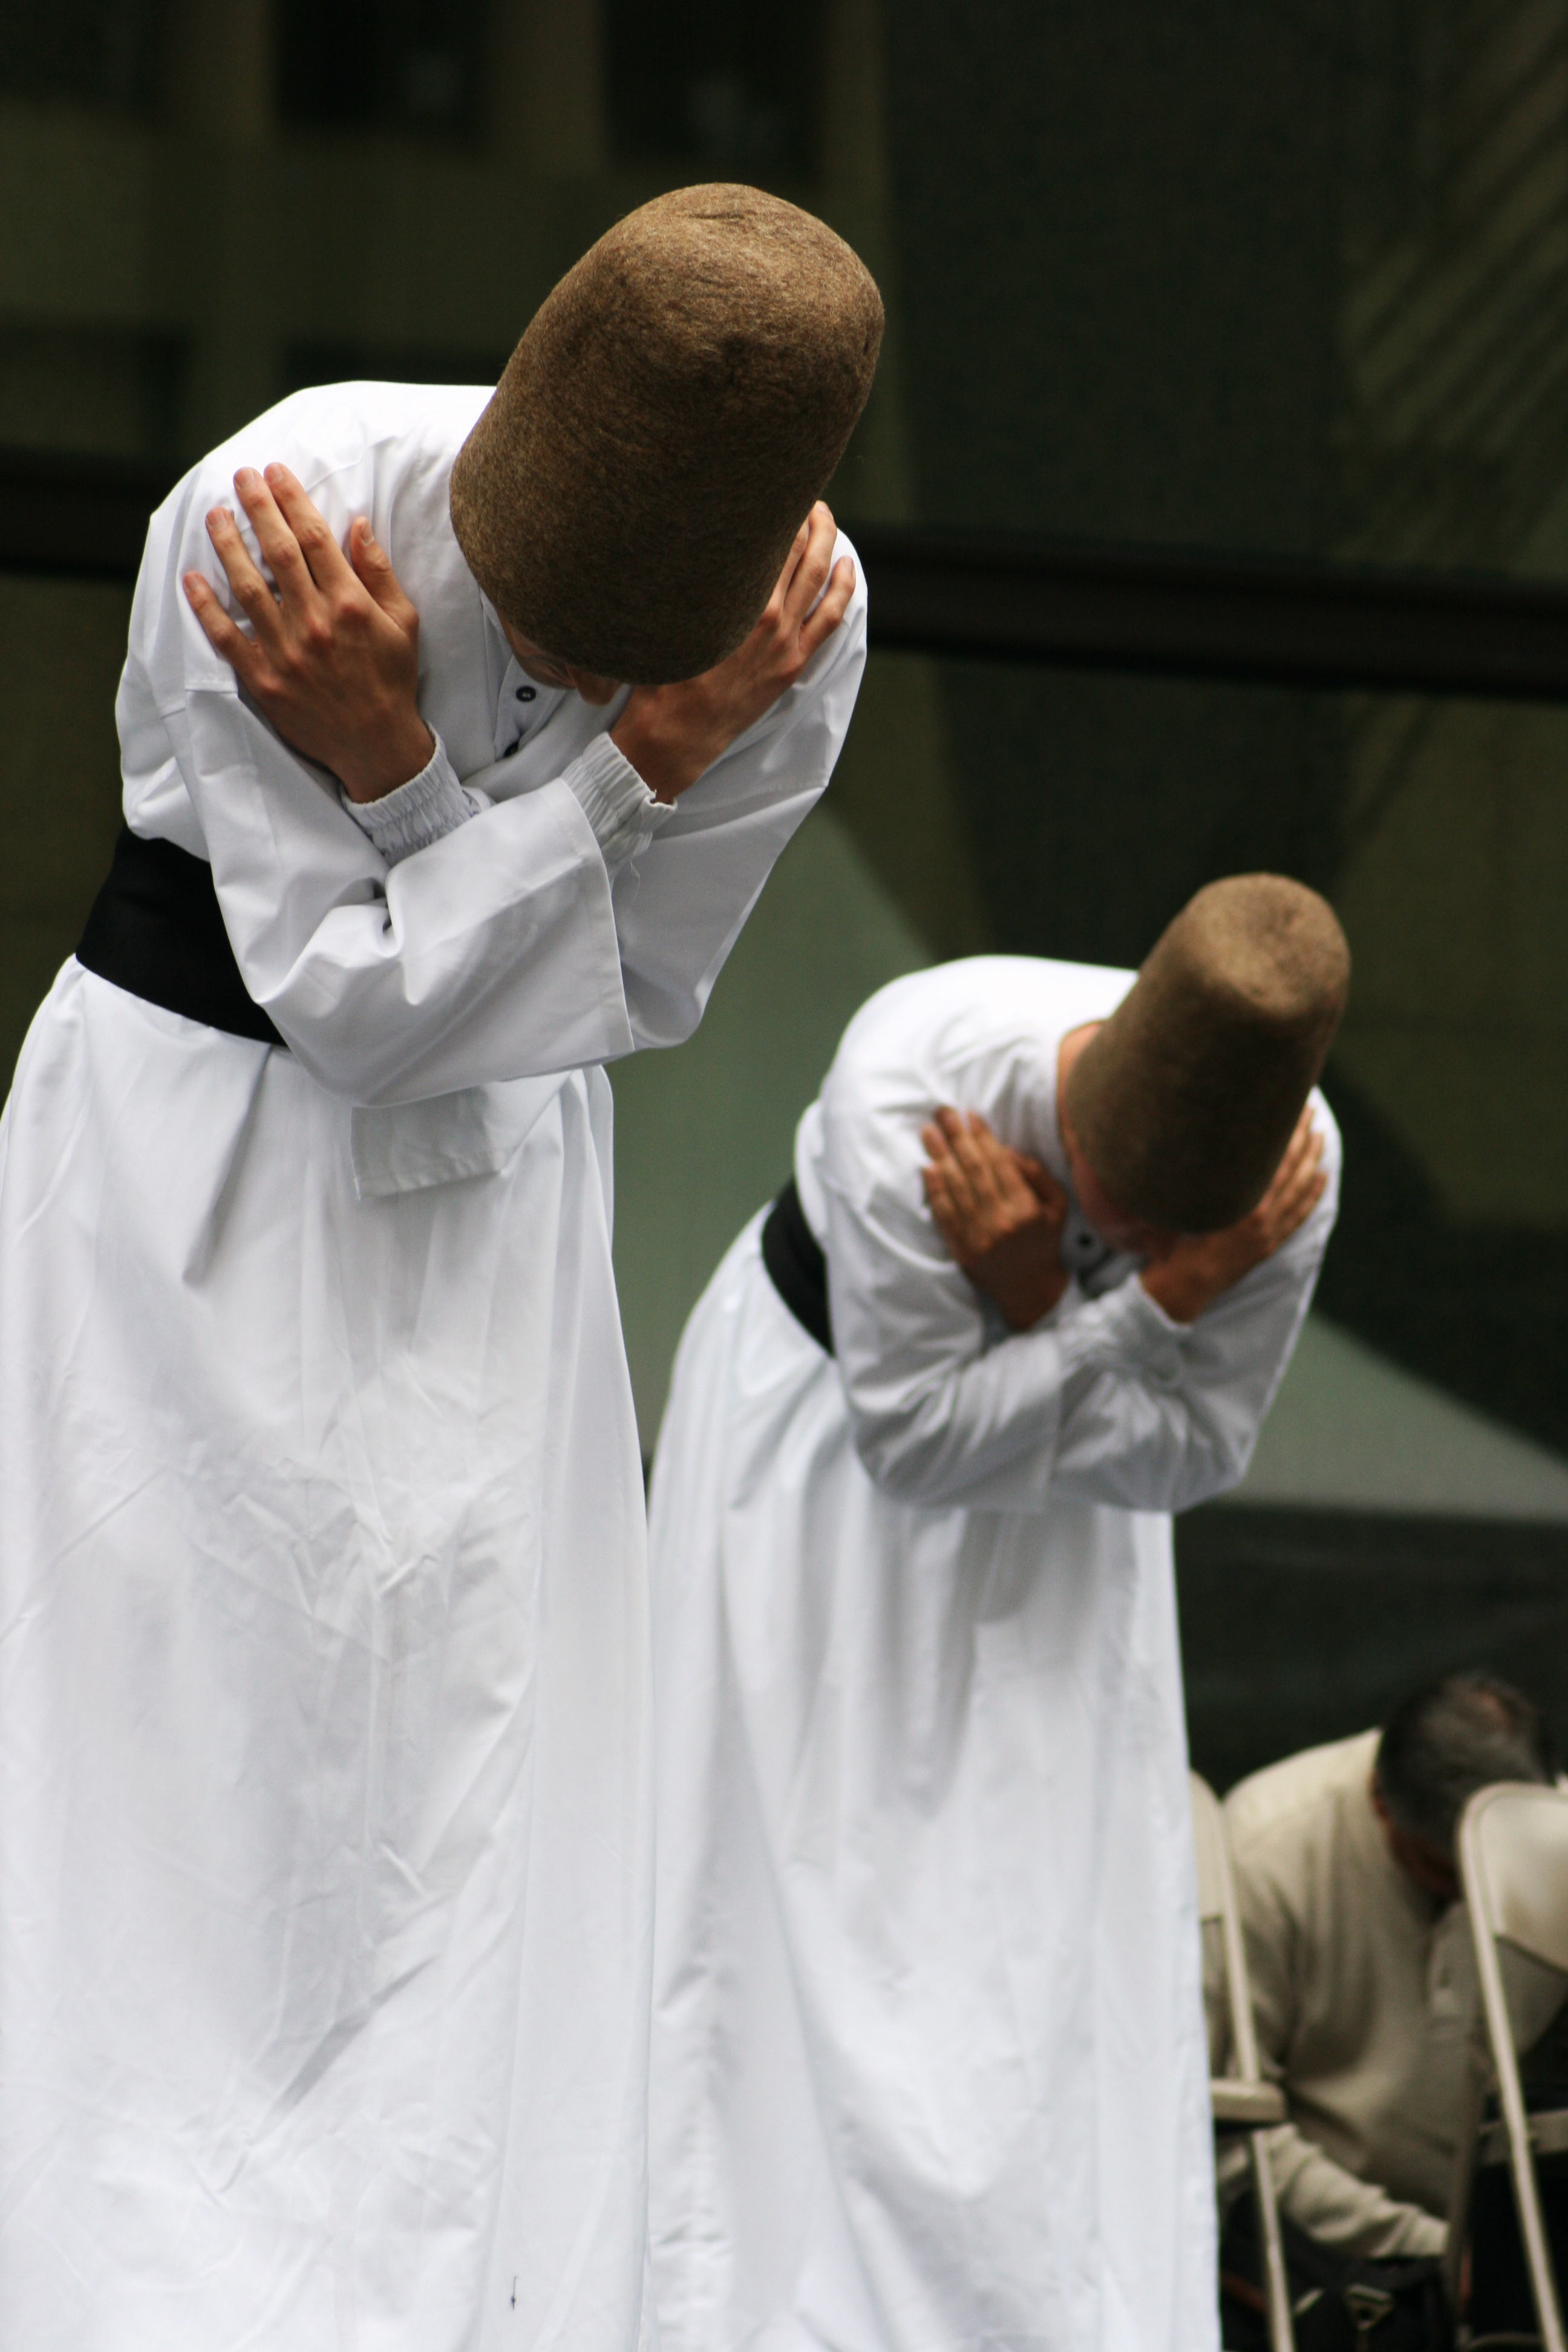 http://upload.wikimedia.org/wikipedia/commons/c/ce/Turkish_whirling_dervishes_of_Mevlevi_Order,_bowing_in_unison_during_the_Sema_ceremony.jpg